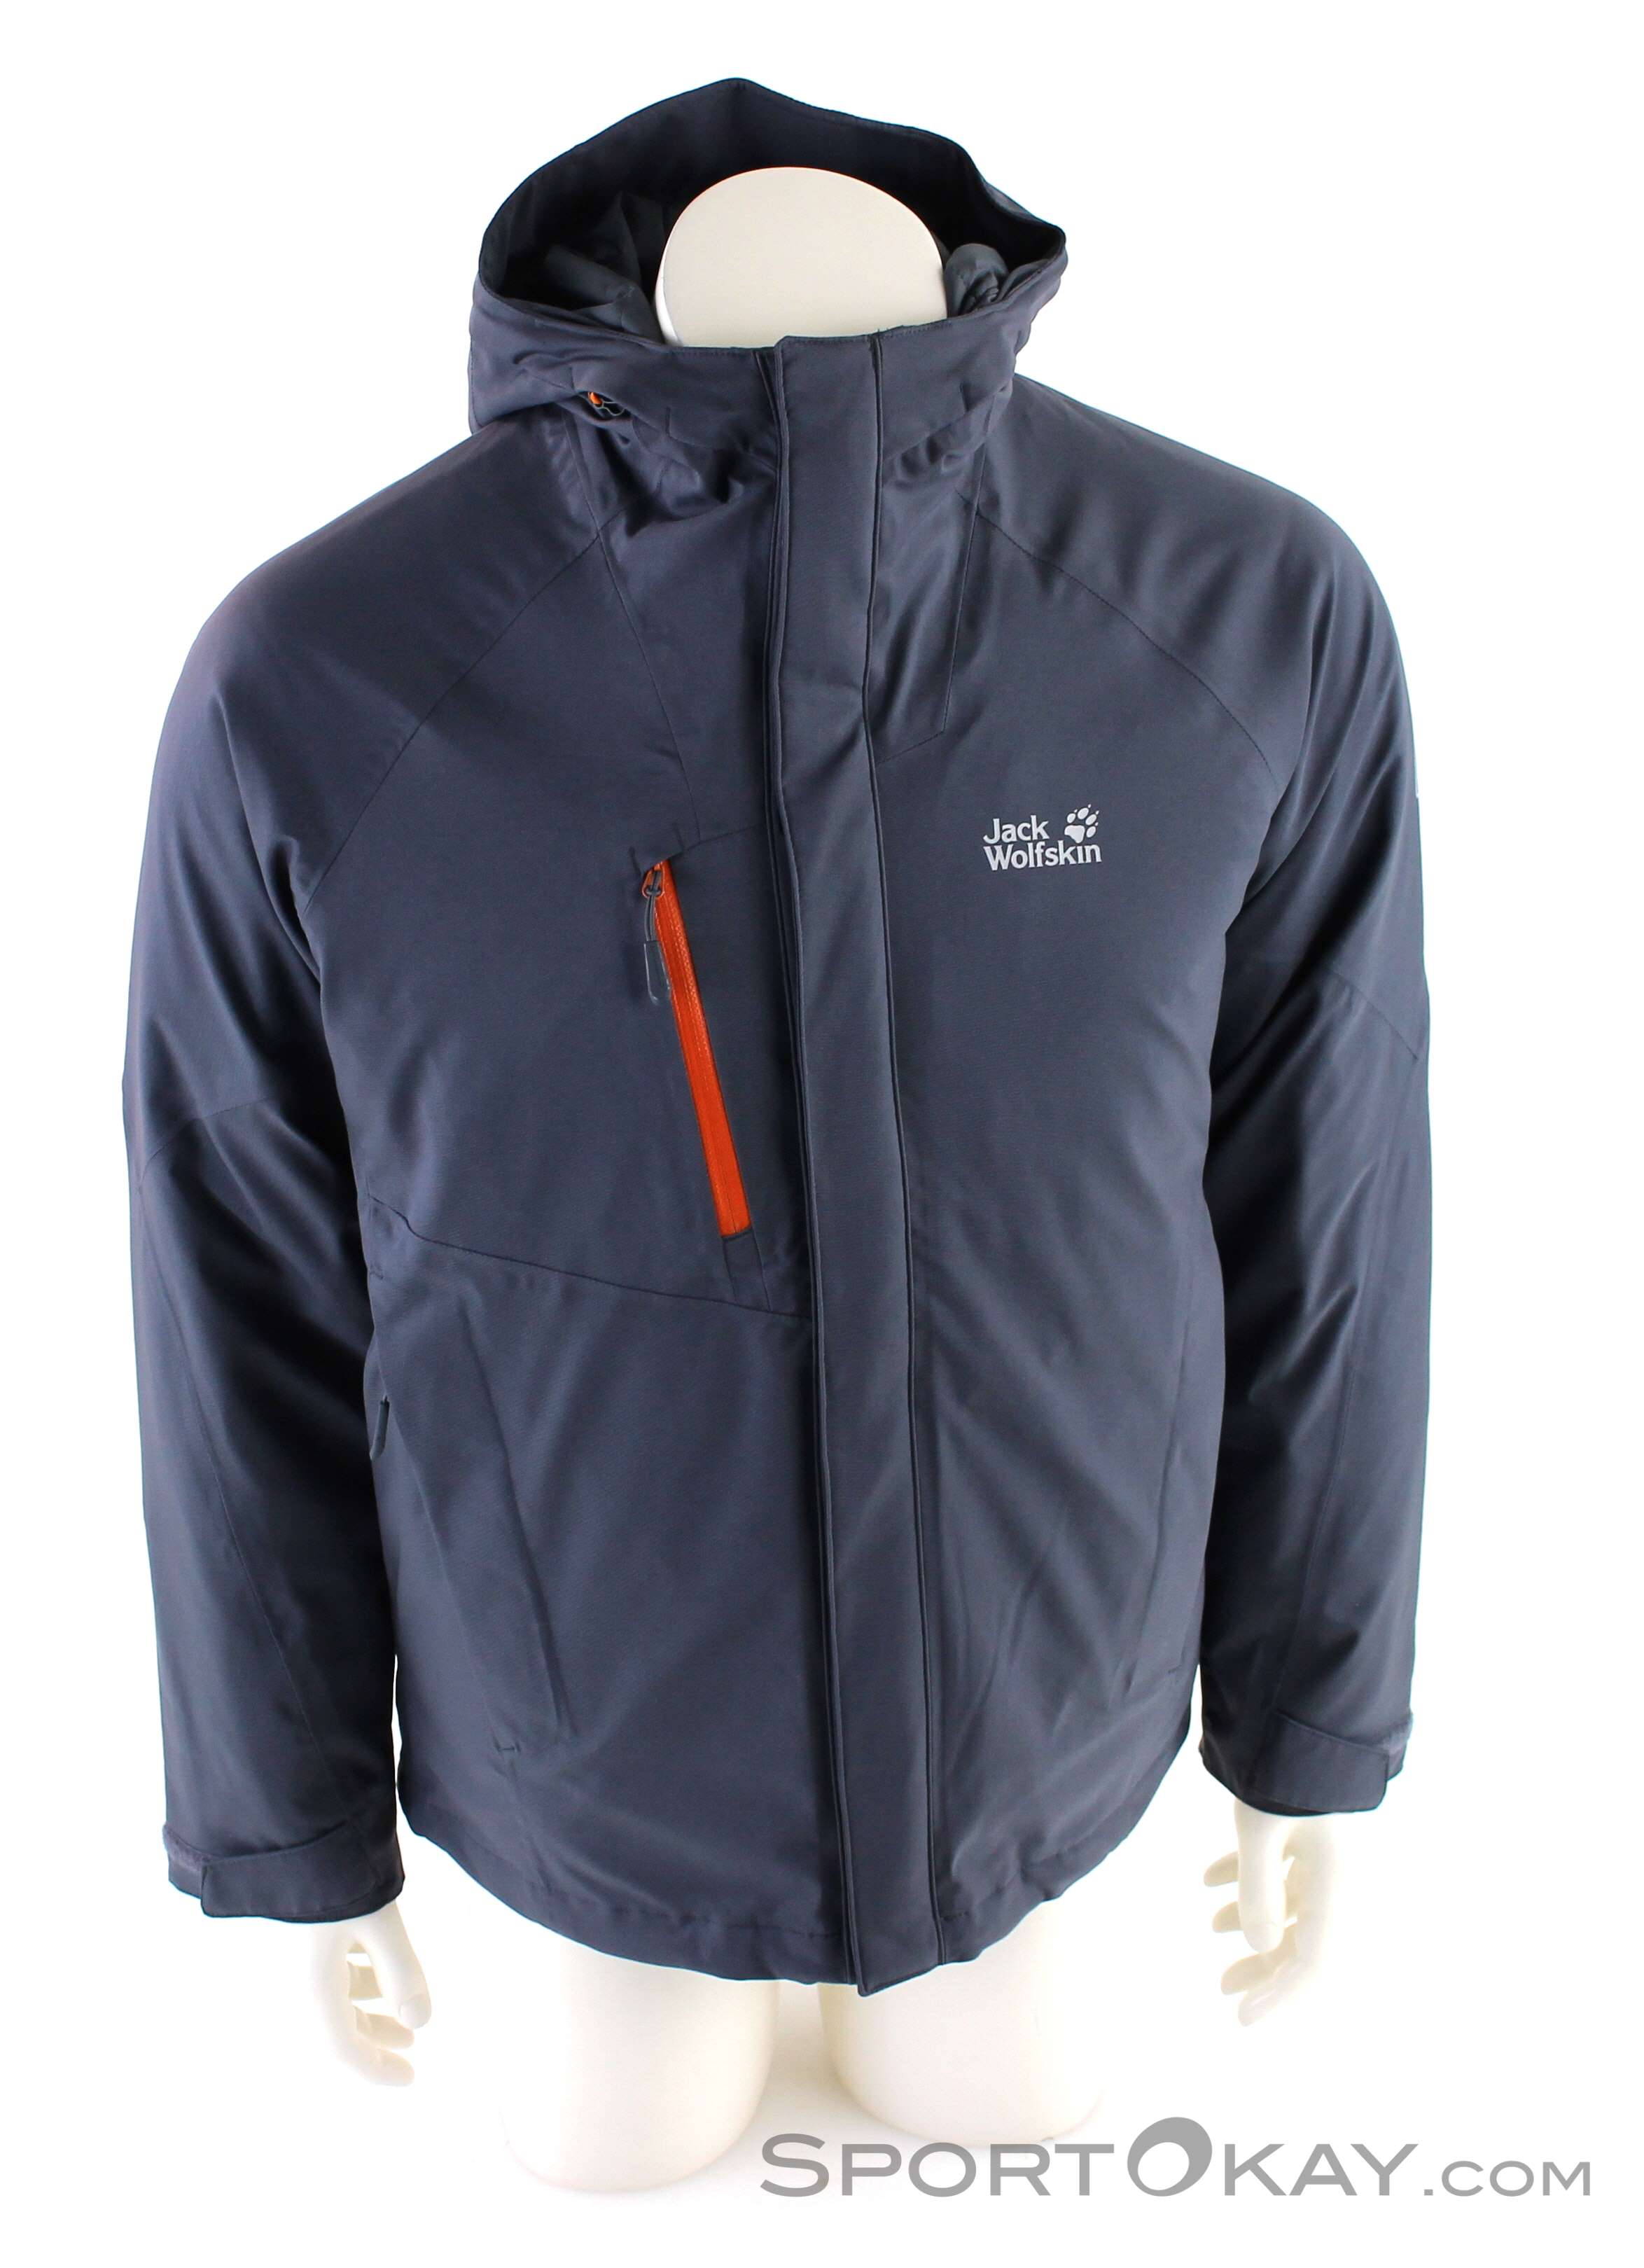 Jack Wolfskin Jacket Mens Outdoor Jacket - Jackets - Outdoor Clothing - Outdoor - All